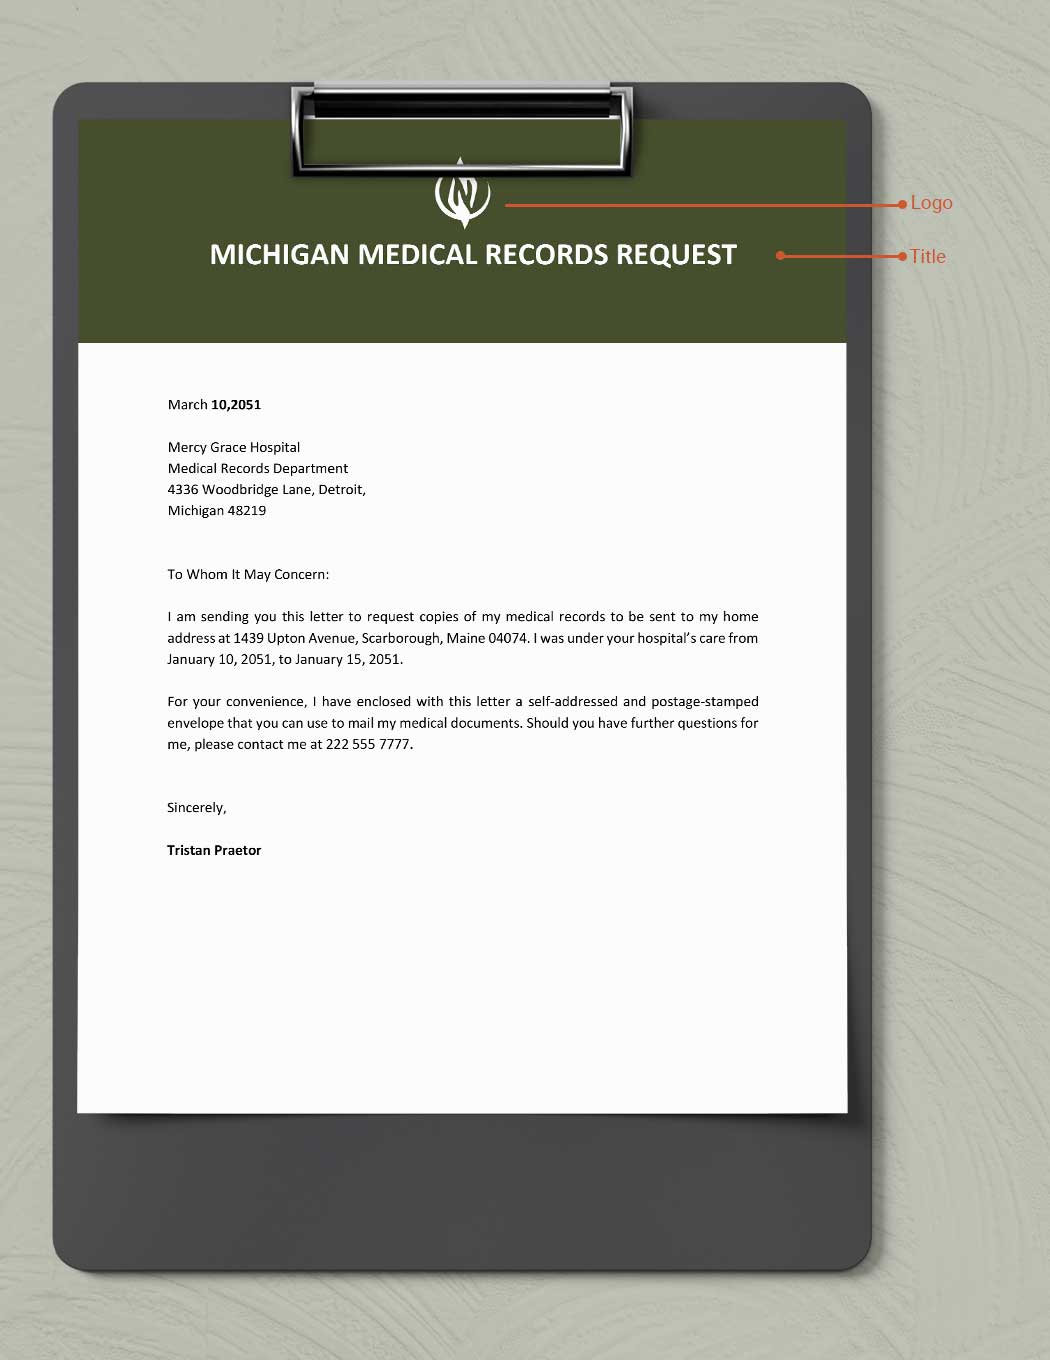 Michigan Medical Records Request Template Download in Word, Google